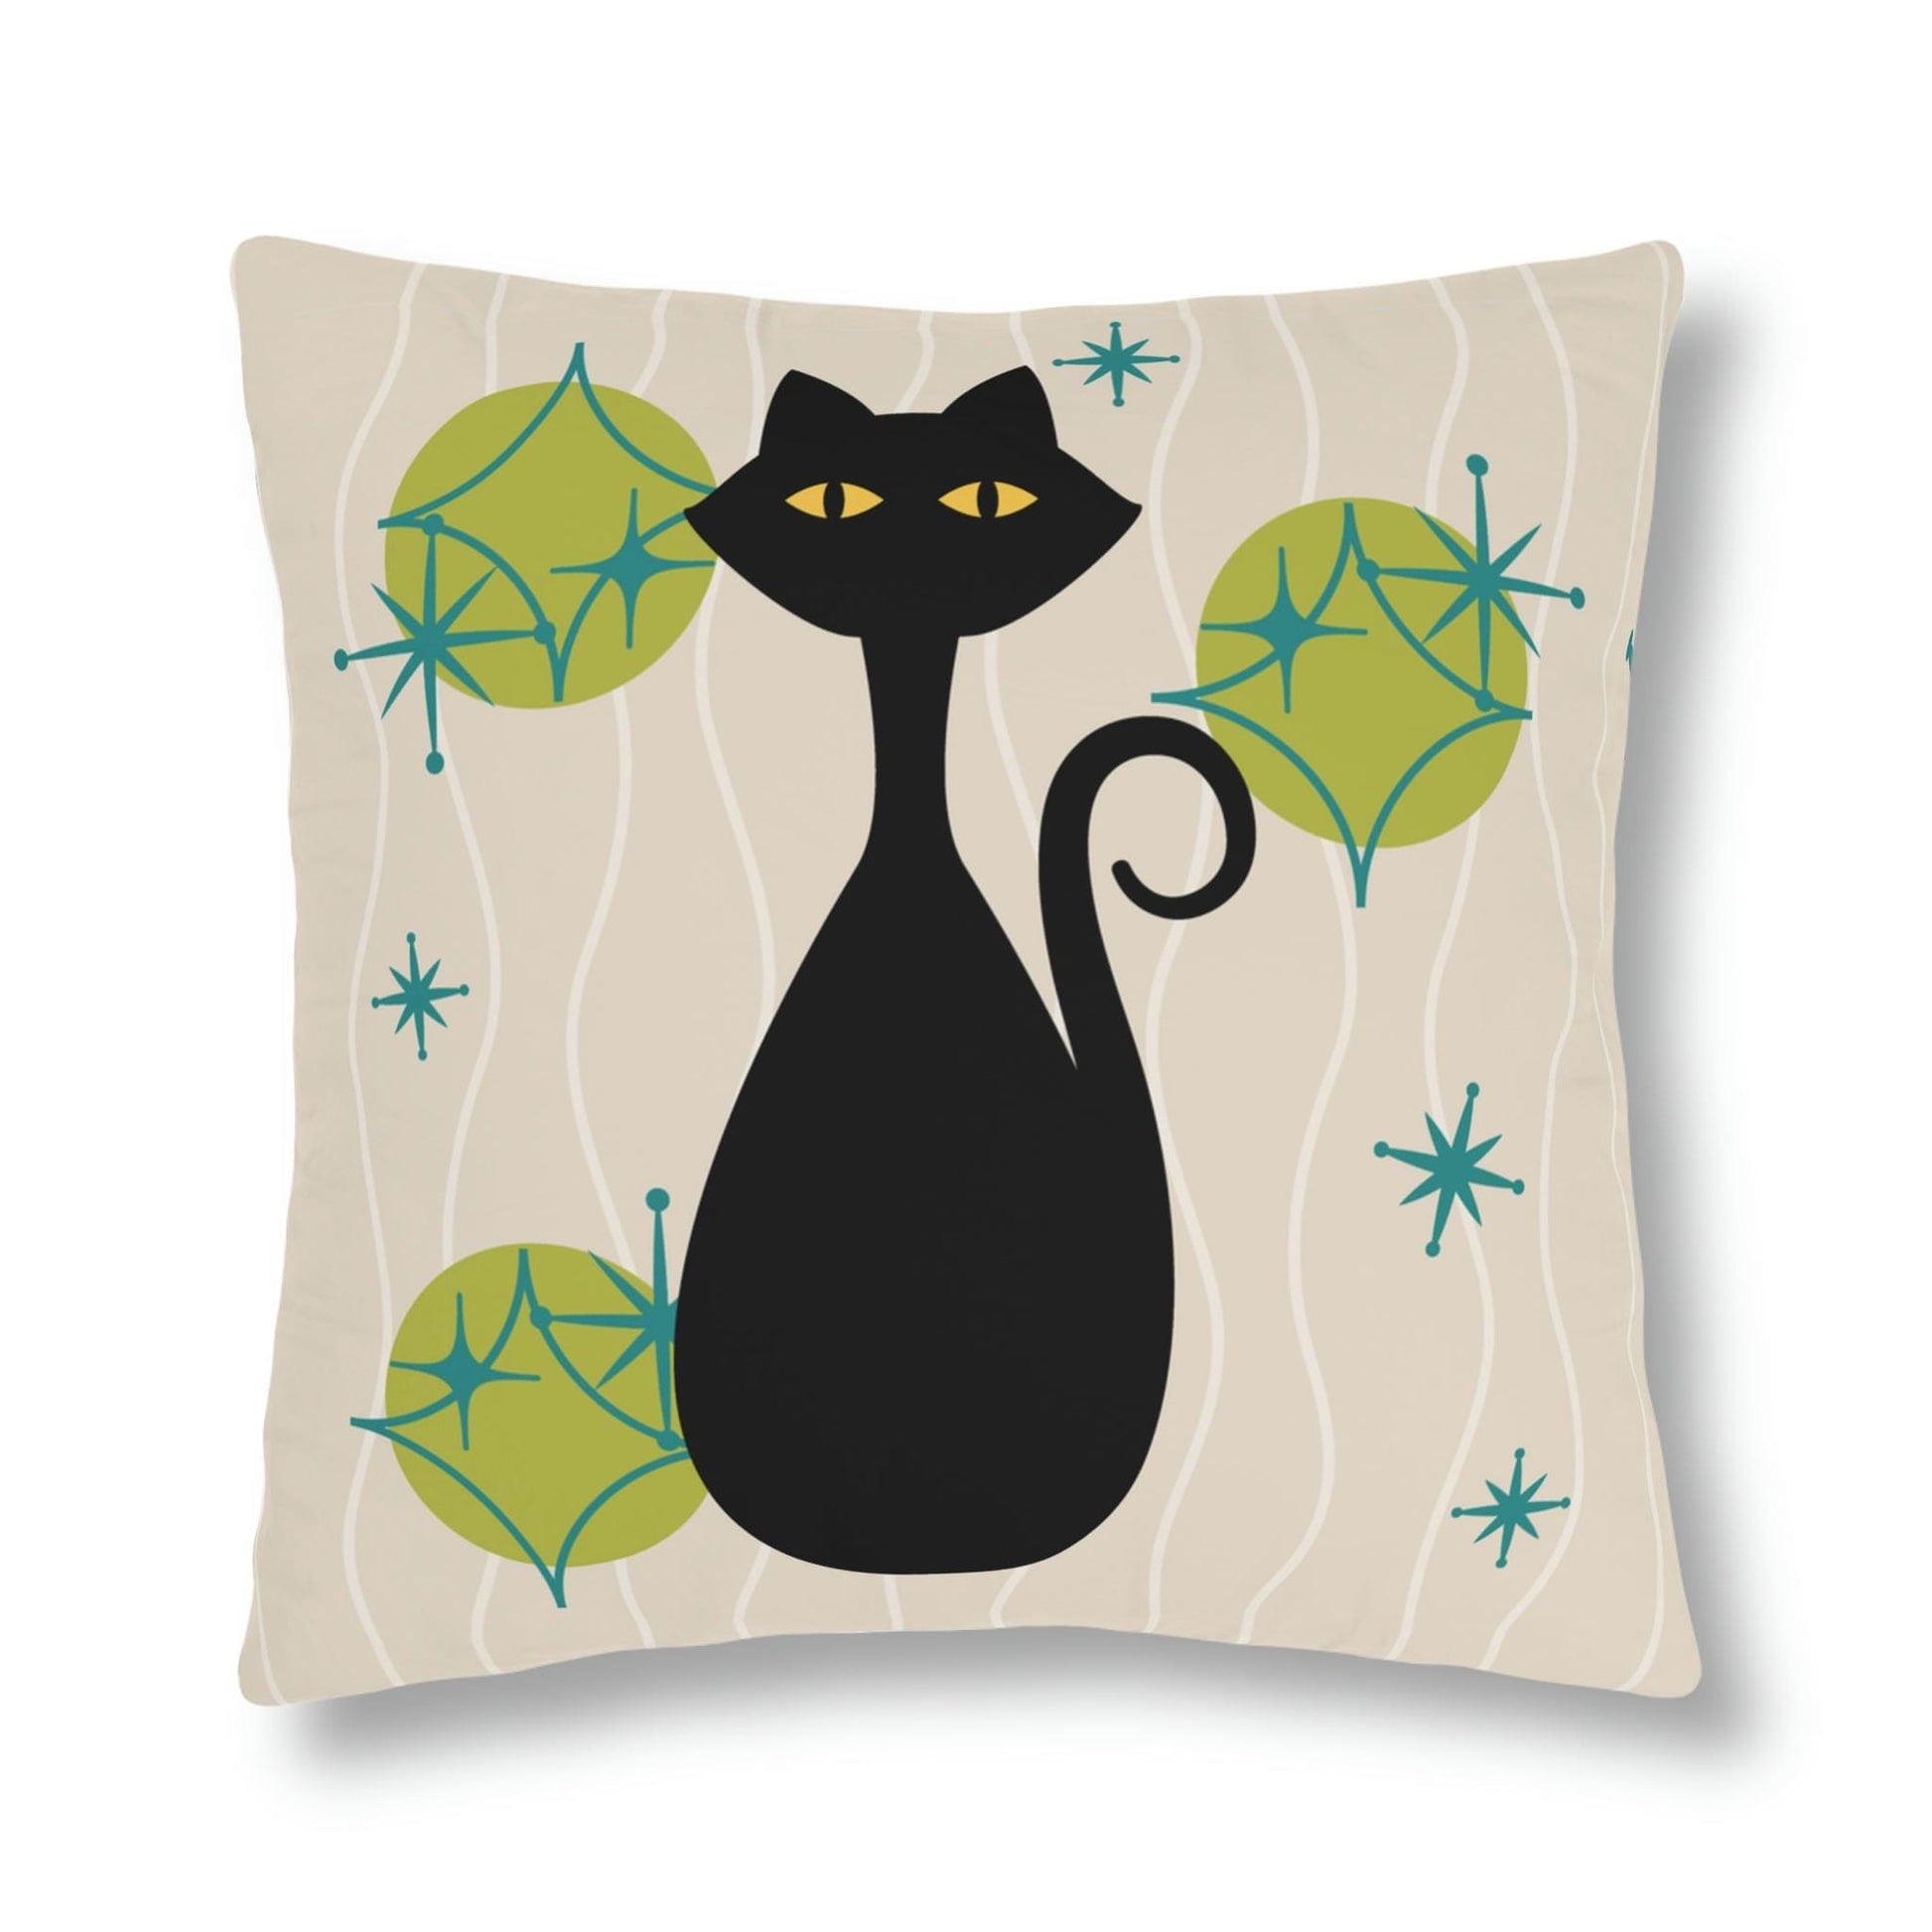 Kate McEnroe New York Outdoor Pillow in Retro 1950s Atomic Cat Print Outdoor Pillows 18" × 18" / Square 19419355003585140328